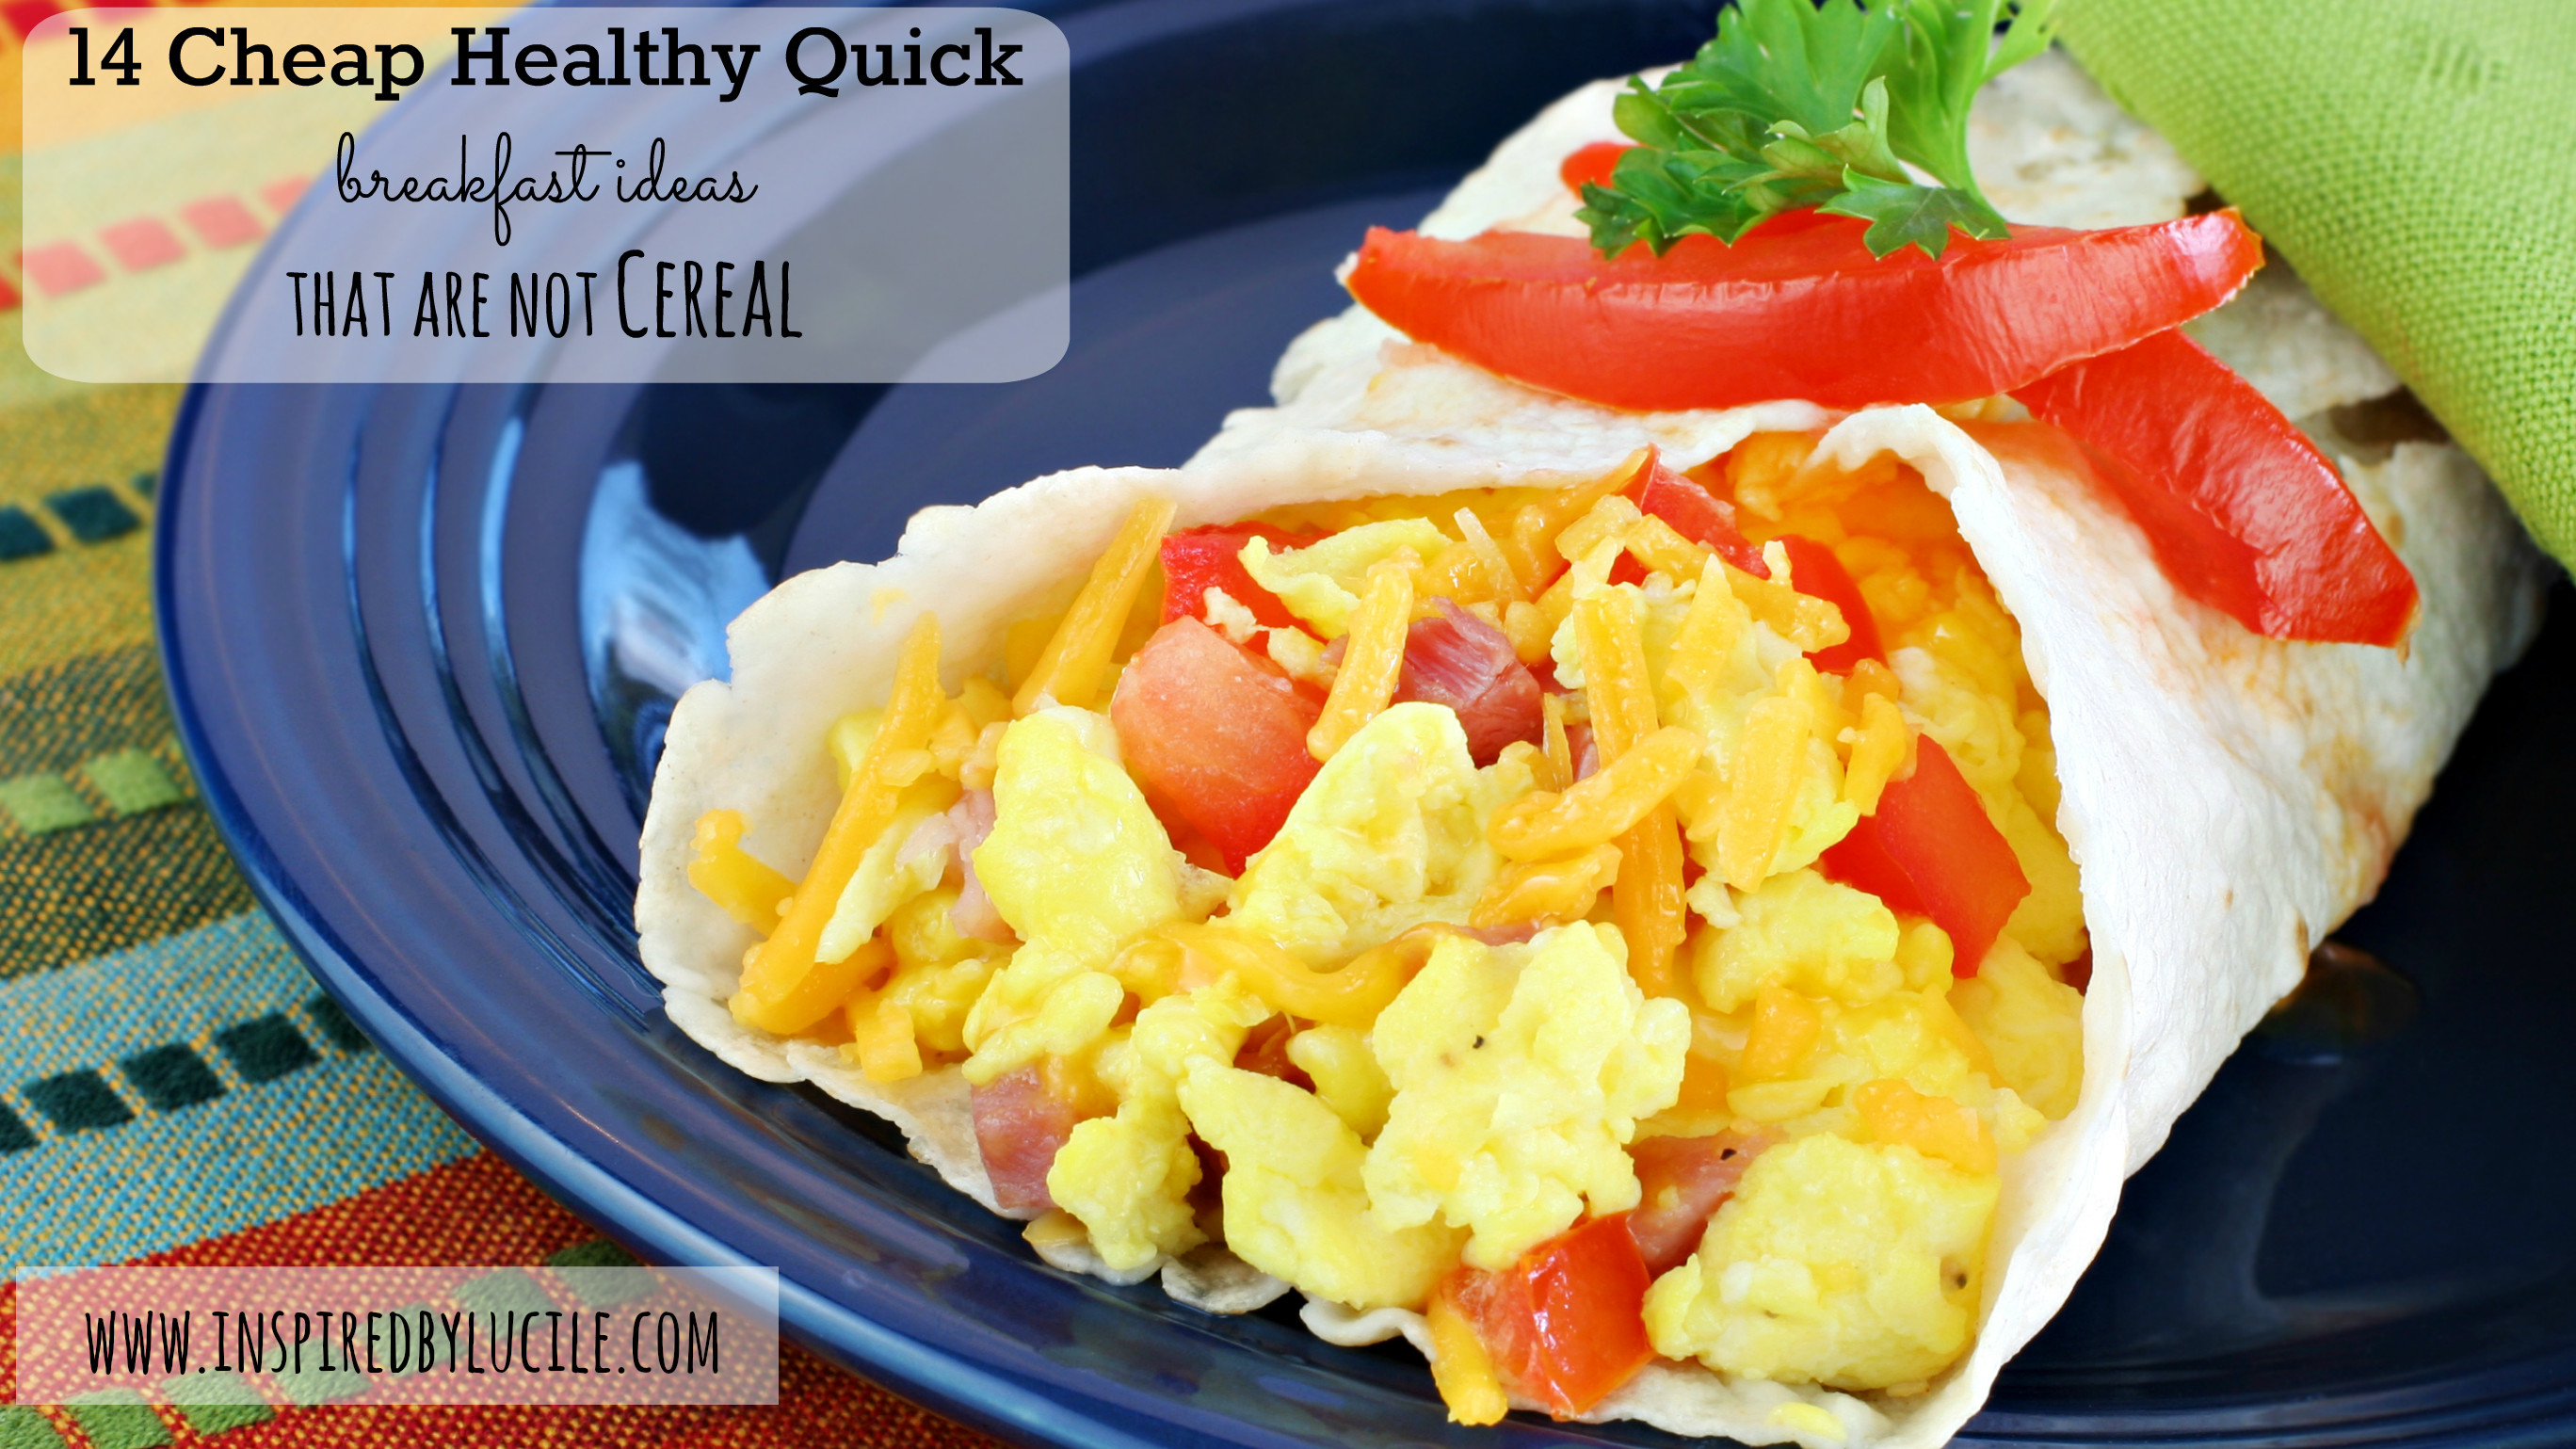 Cheap Healthy Breakfast Ideas
 14 Cheap Healthy Quick Breakfast Ideas that Are not Cereal